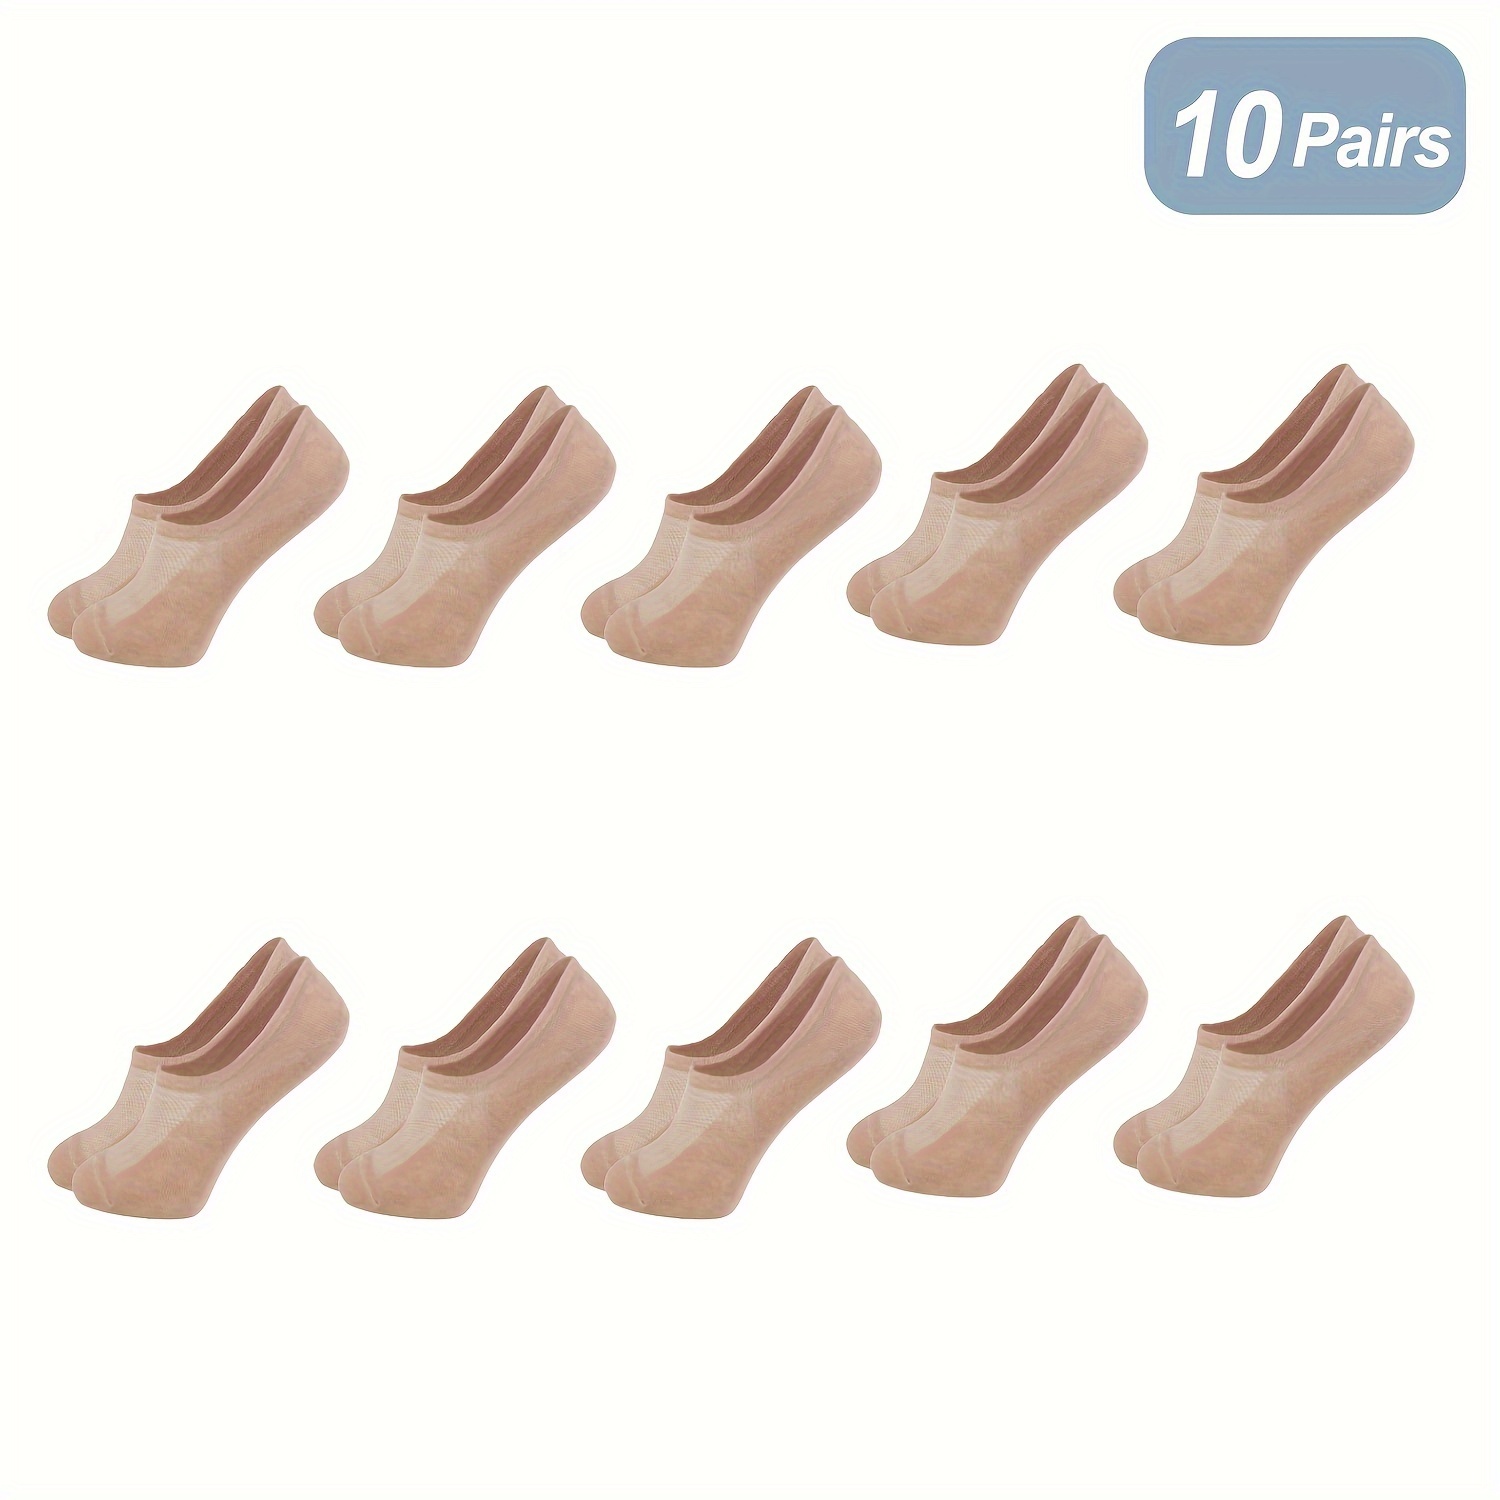 

10 Pairs Women's Breathable Mesh No-show Socks, Comfortable Low Cut Invisible Casual Socks